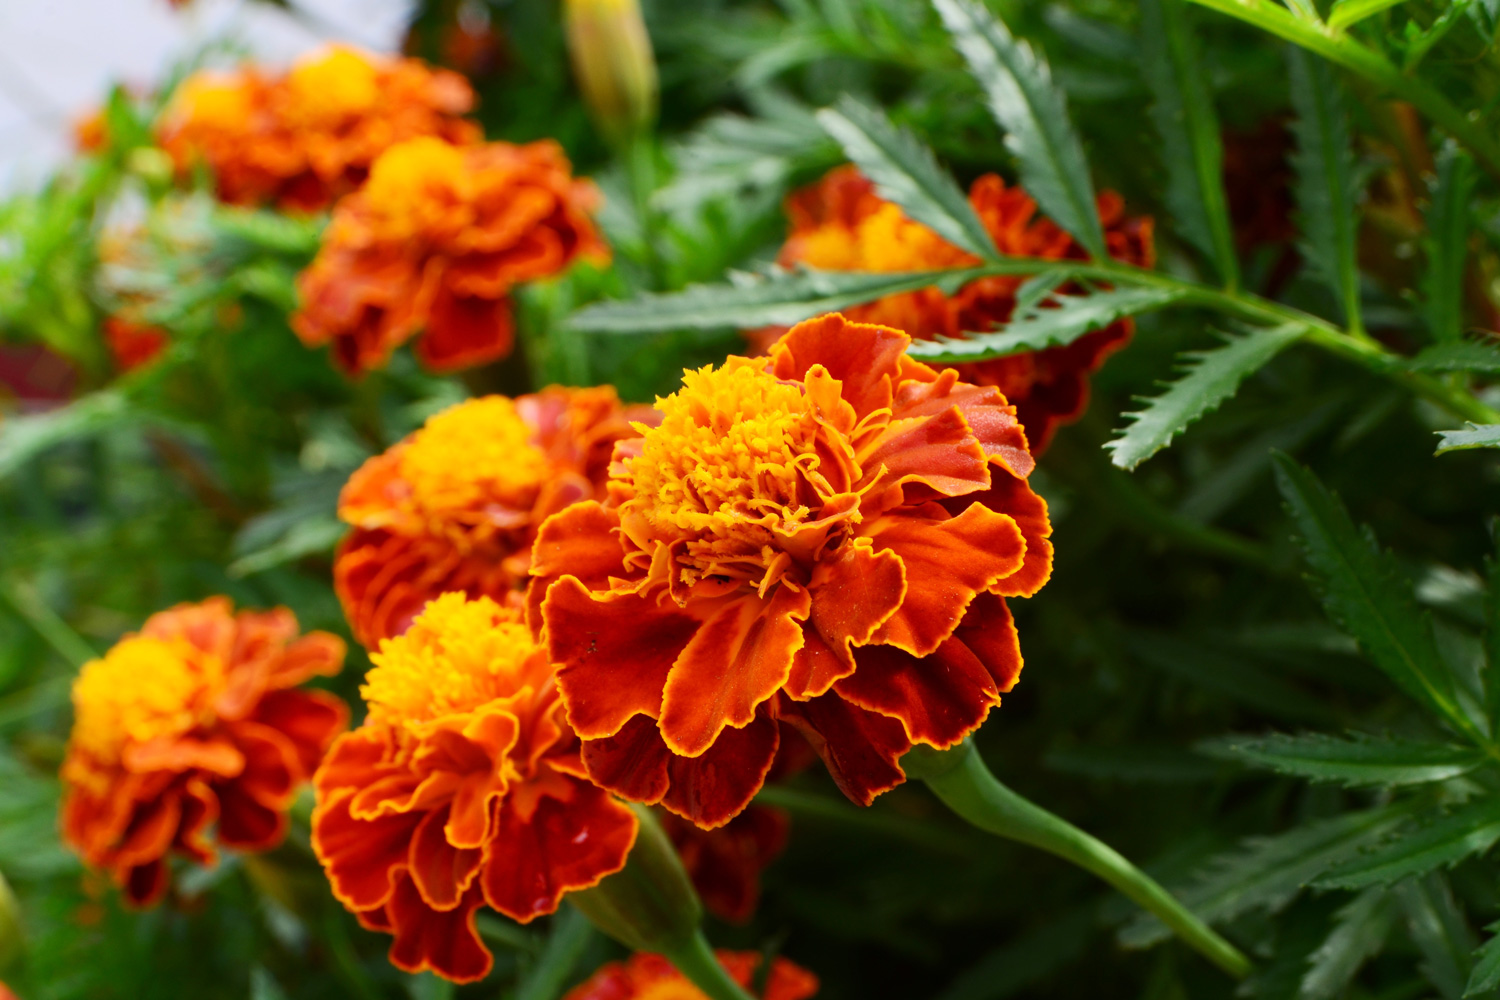 French marigold flowers or Tagetes patula or marigold bolero have reddish-orange petals with a combination of yellow